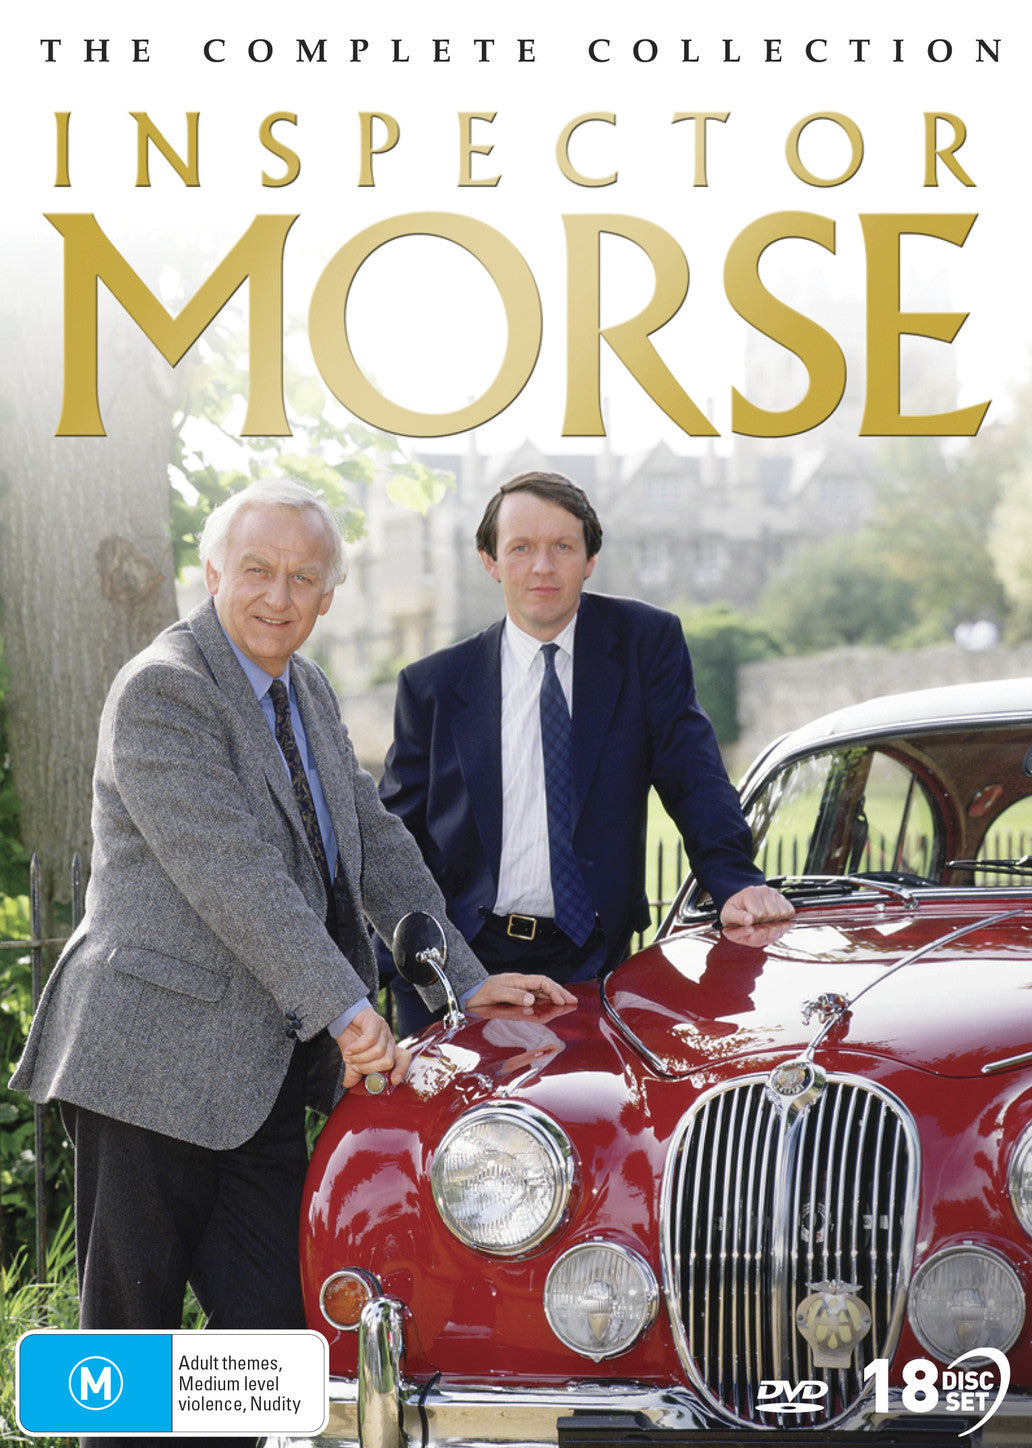 INSPECTOR MORSE: THE COMPLETE COLLECTION